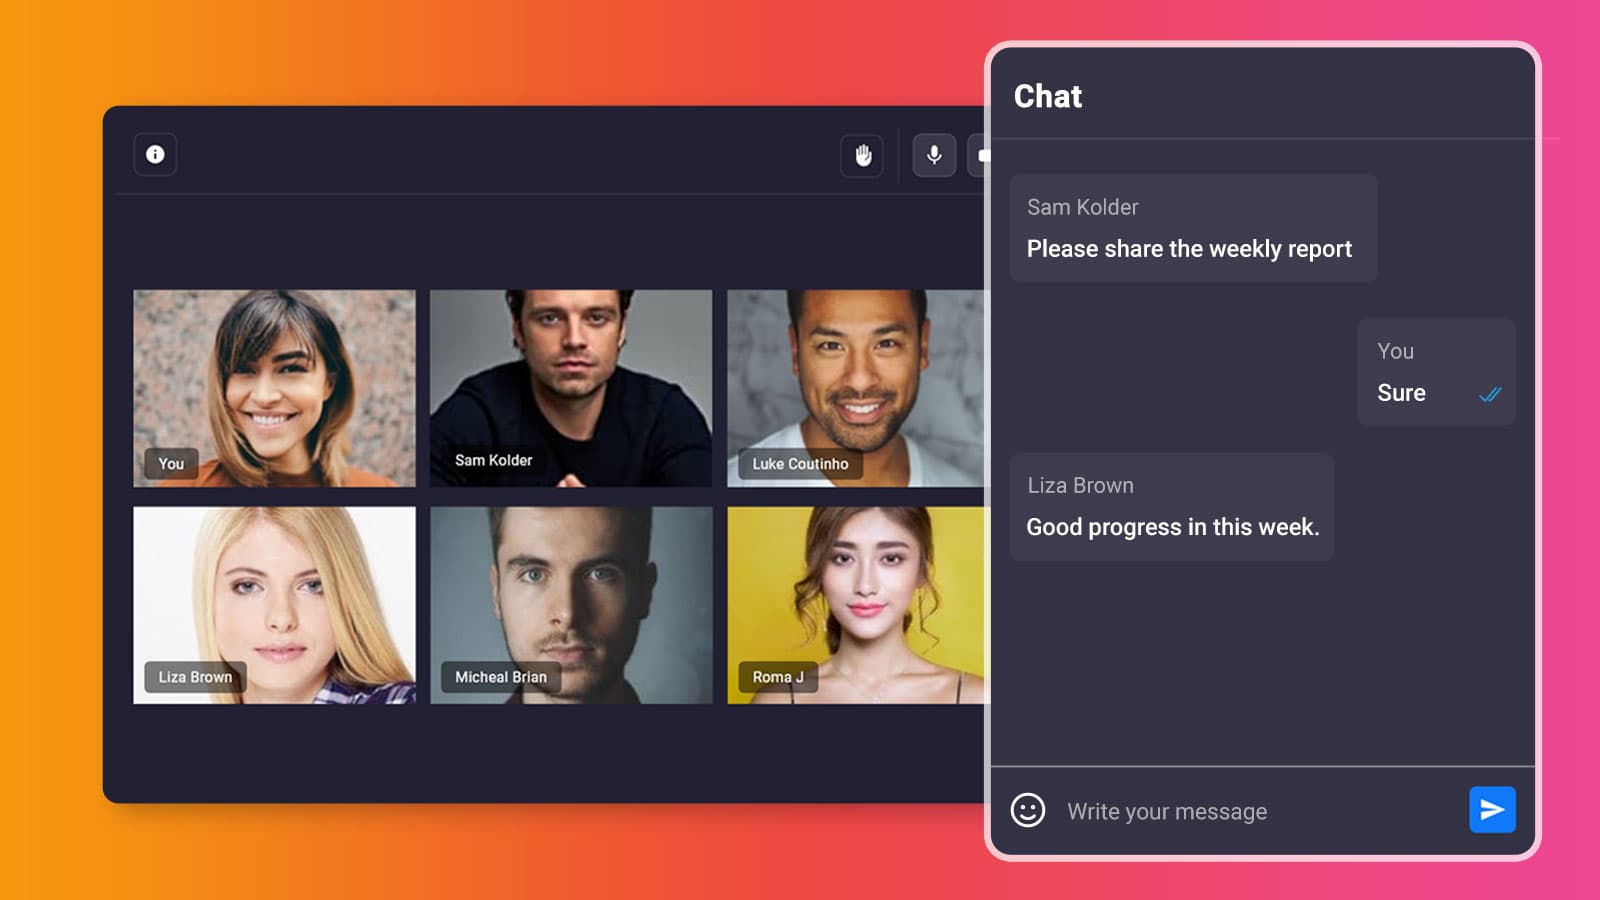 Real-time chatting